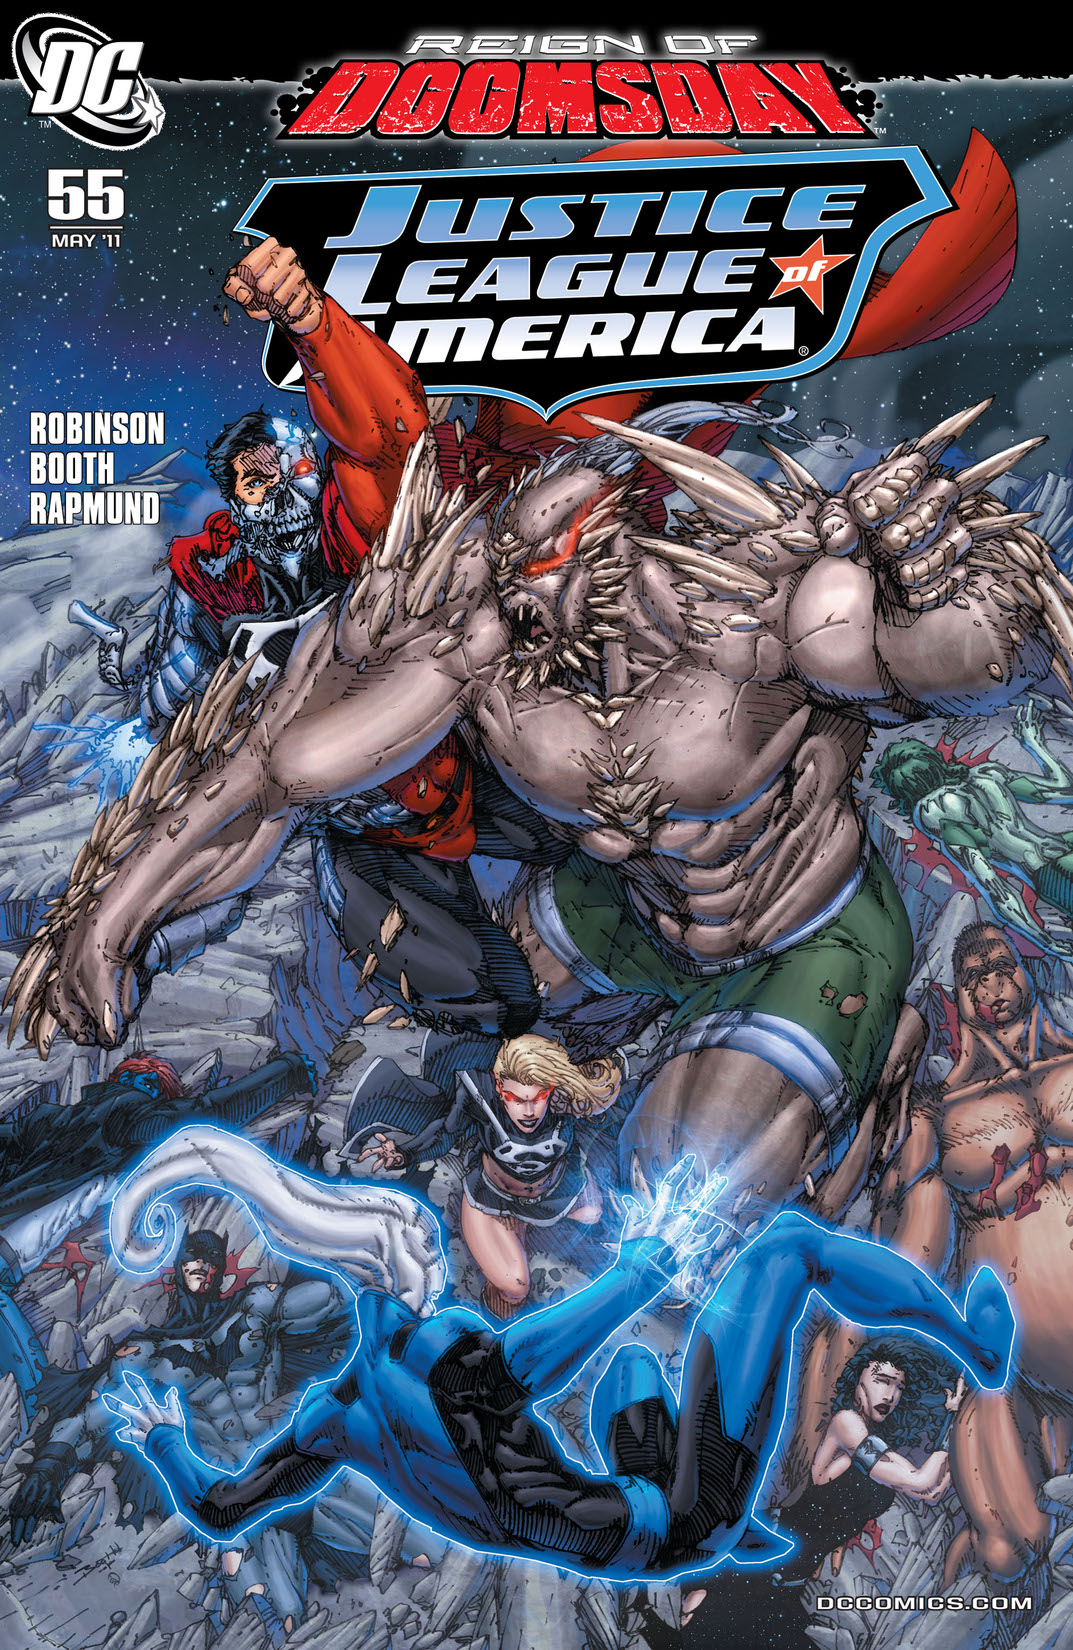 Justice League of America (2006-) #55 preview images